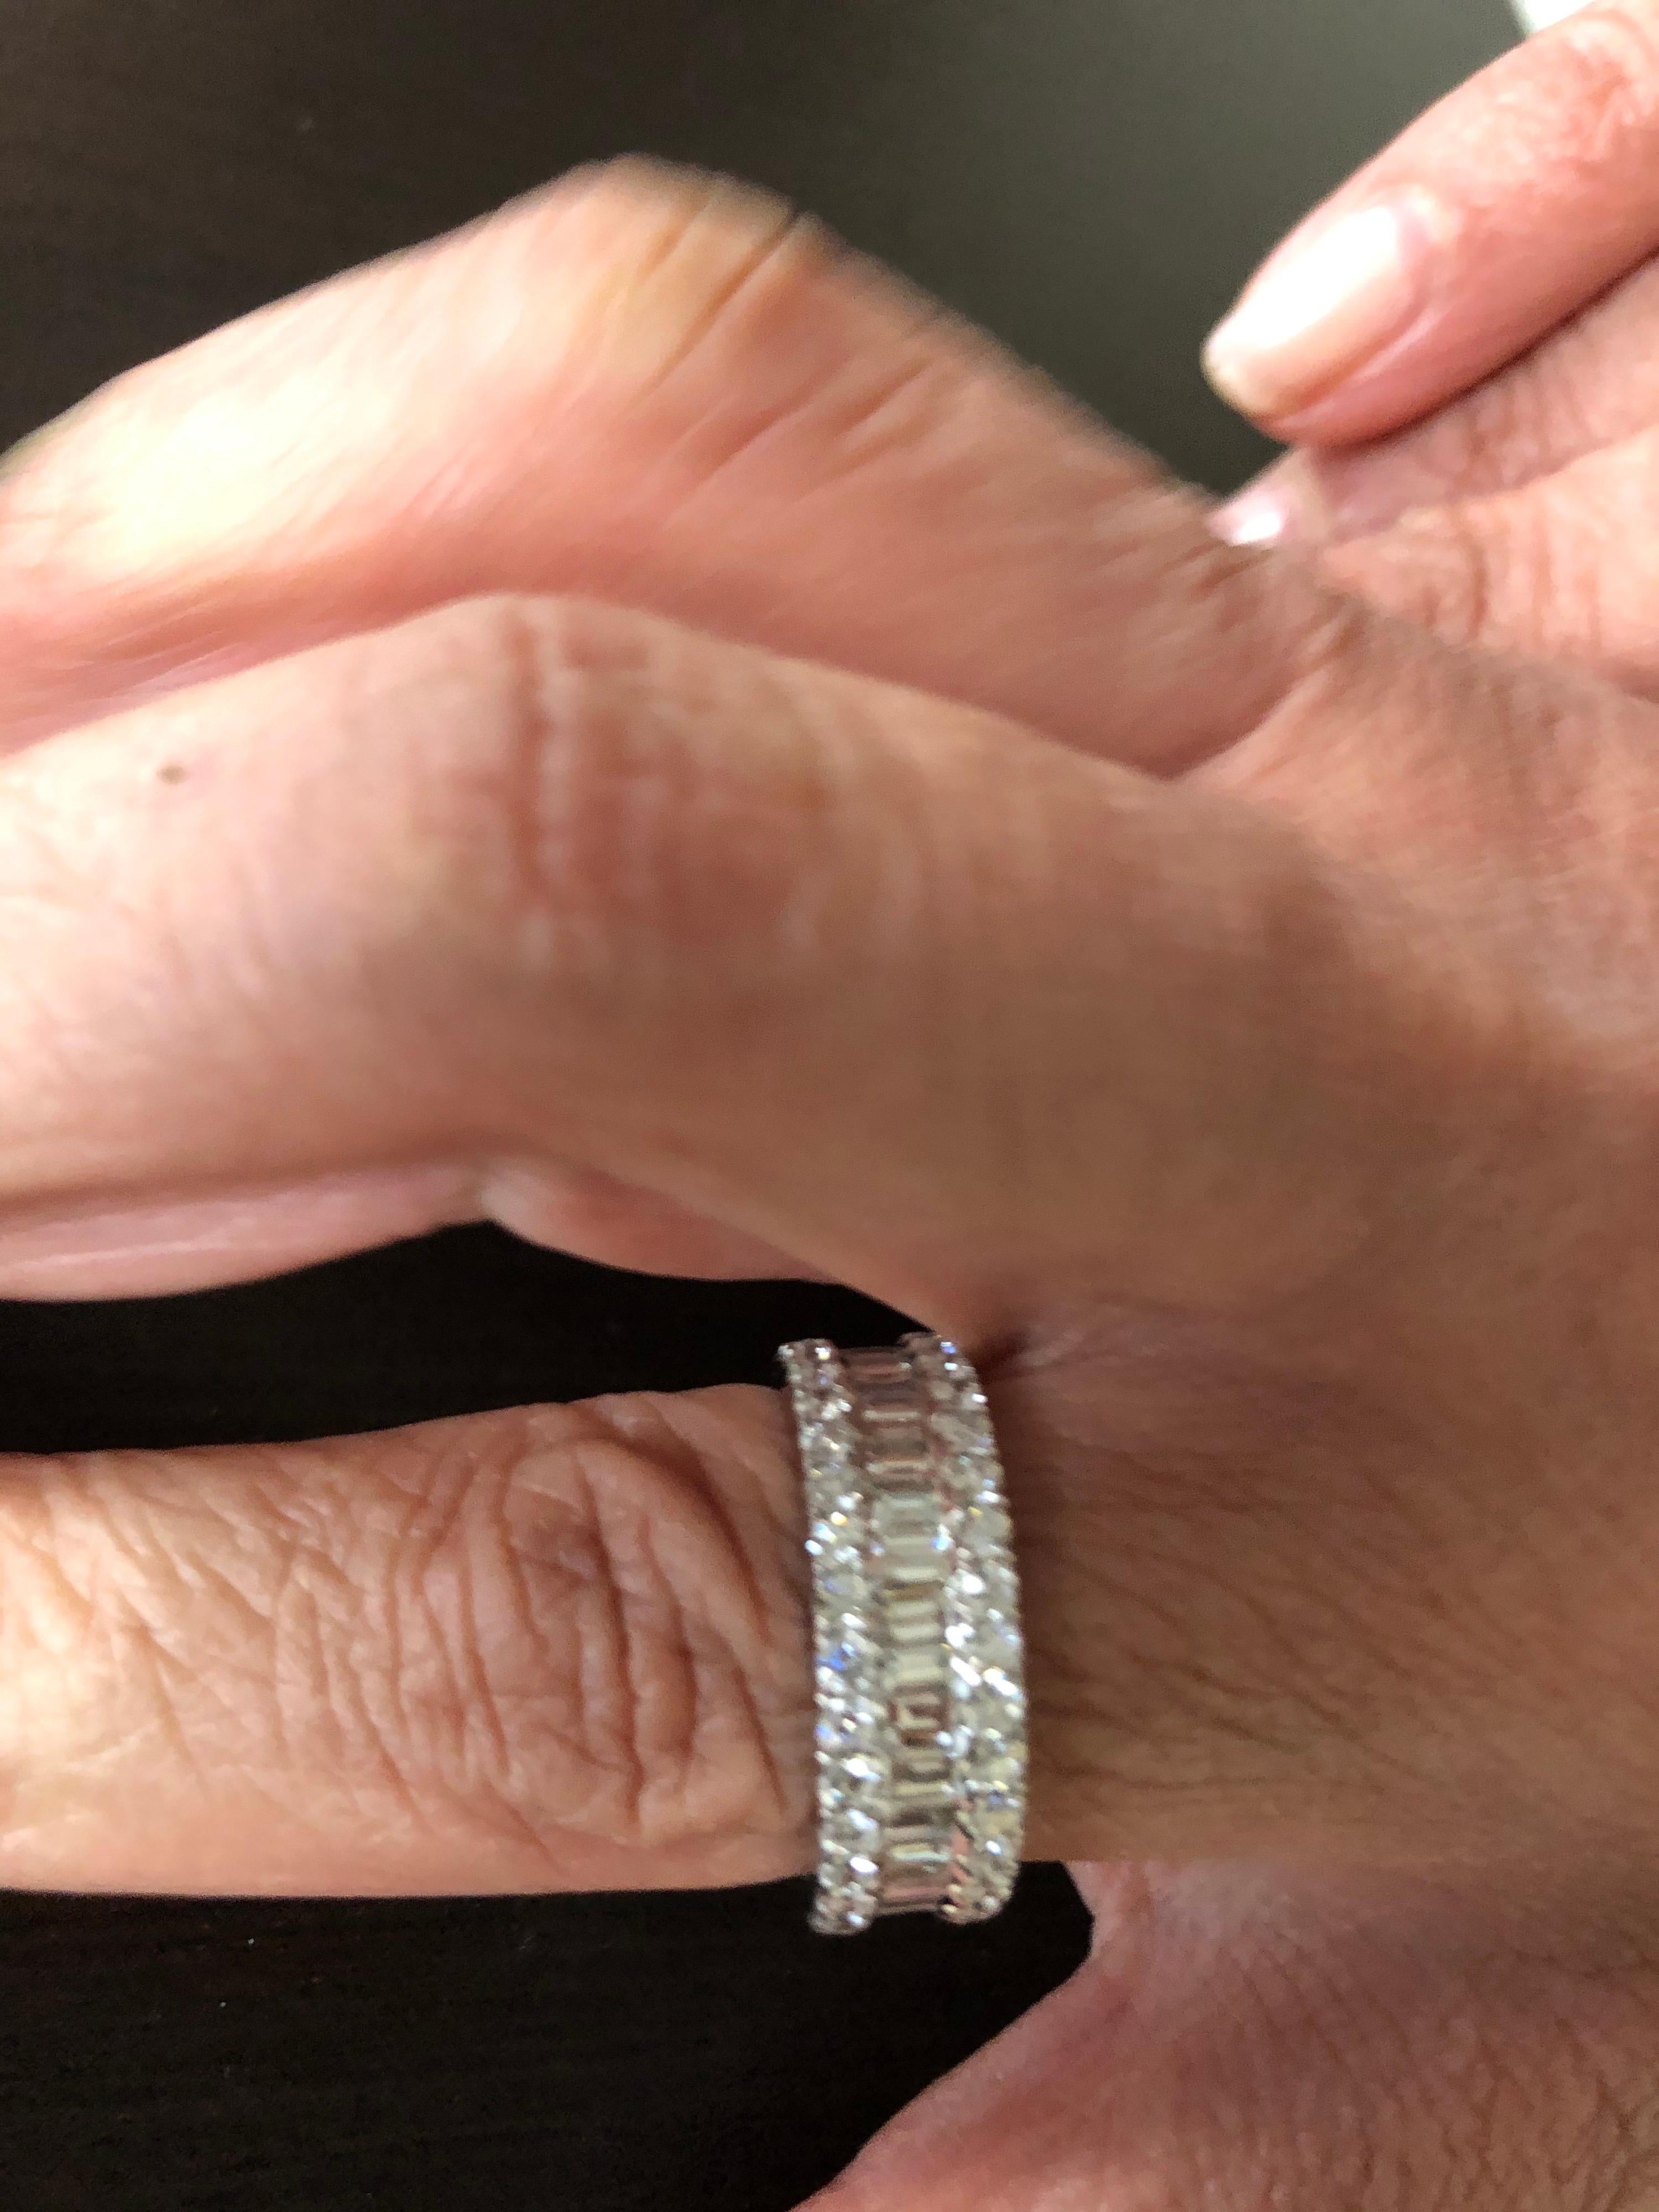 18K white gold ring set with baguette and round diamonds. The ring is set with 2 rows of round diamonds with the carat weight of 1.44. The middle row of the ring is baguettes weighing a total of 1.77 carats. Total weight of the band is 3.21 carats.